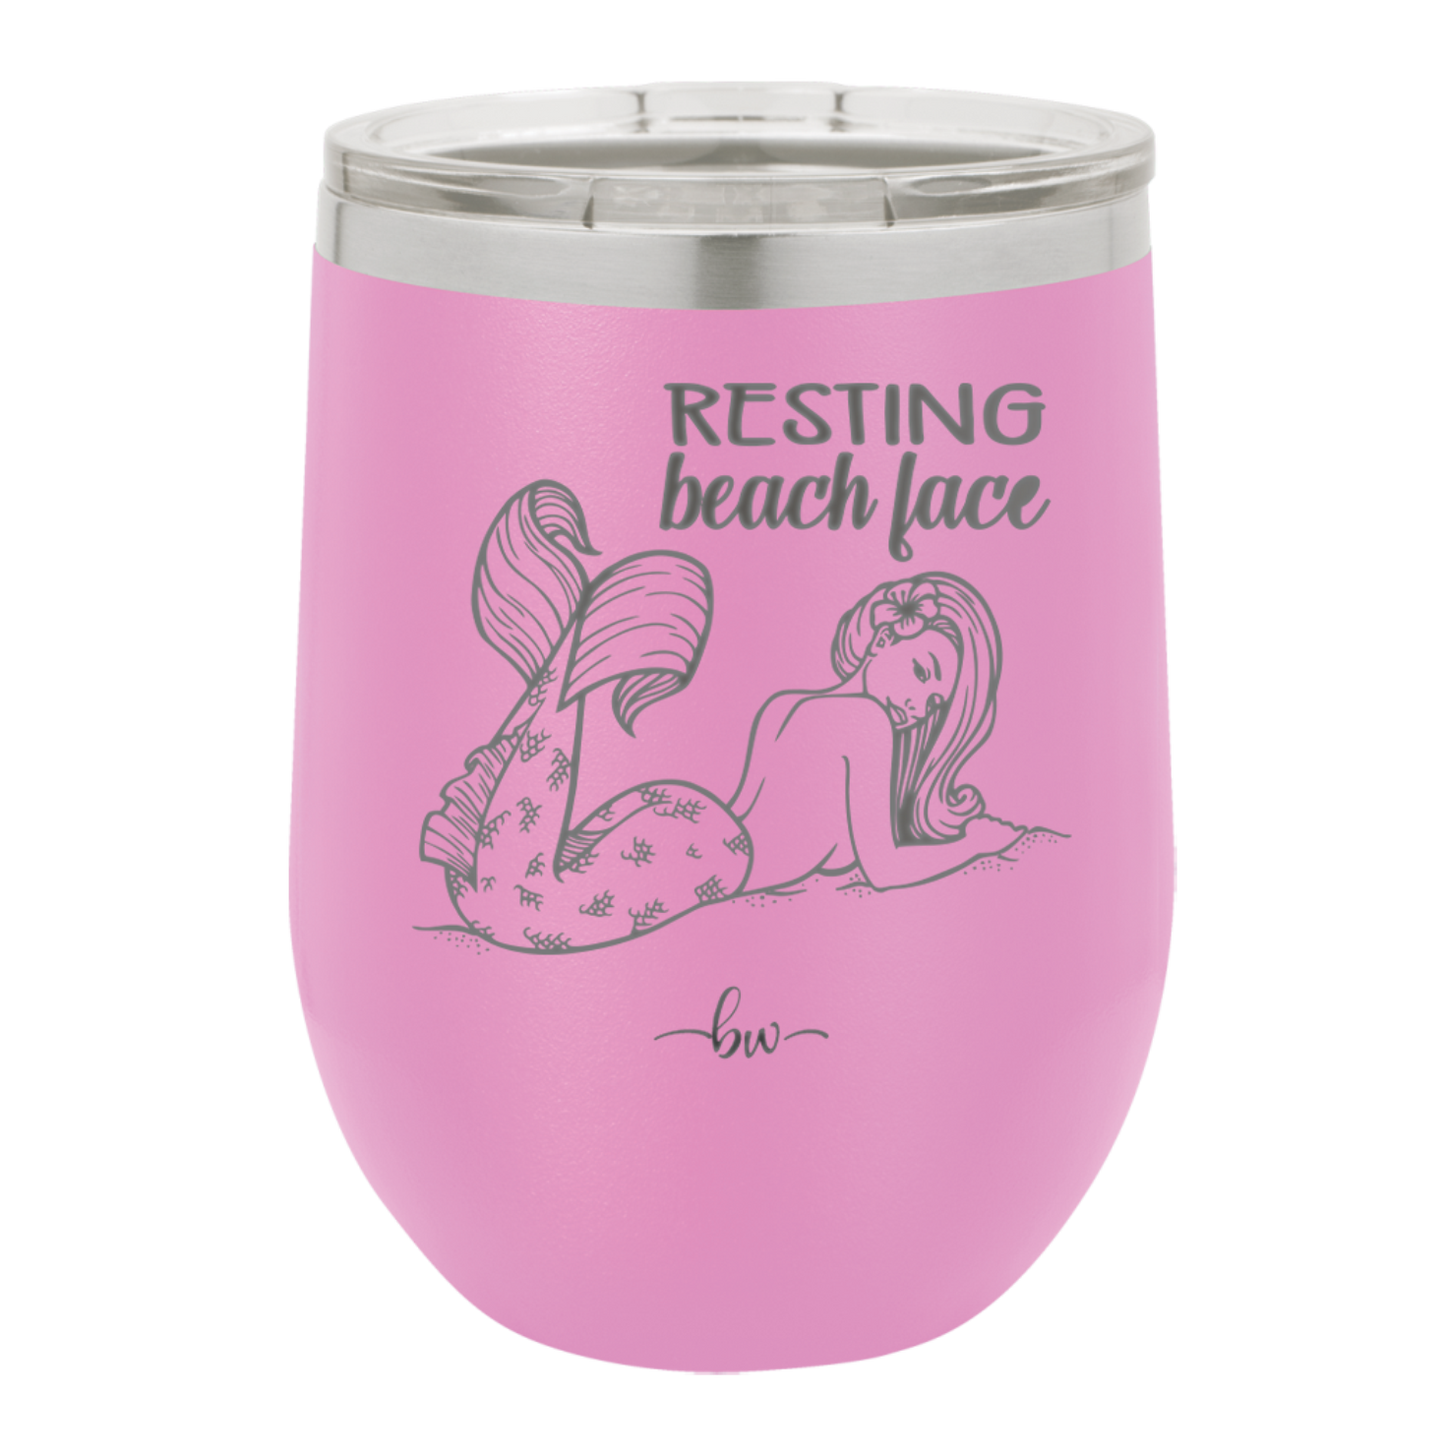 Resting Beach Face - Laser Engraved Stainless Steel Drinkware - 1099 -